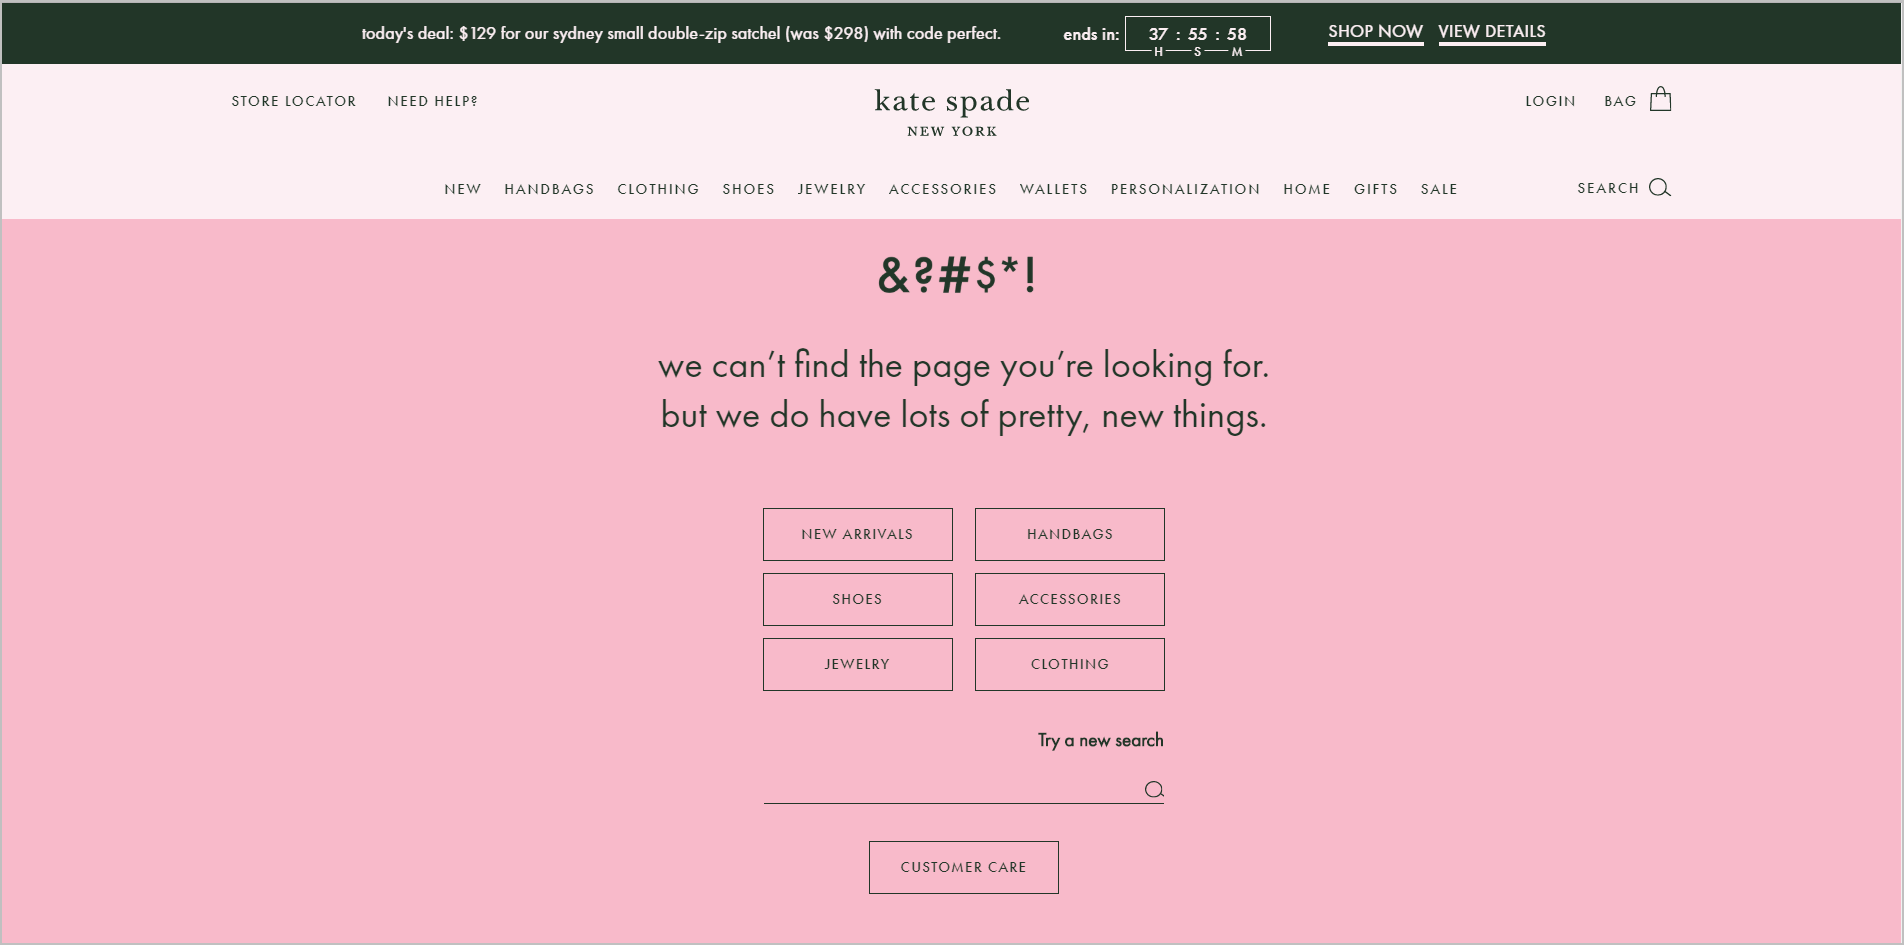 useful ecommerce 404 page design example - katespade.com's error page with a message that says "&?#$*! we can't find the page you're looking for. but we do have lots of pretty, new things". below are two columns of product categories, a search bar, and a "customer care" button 